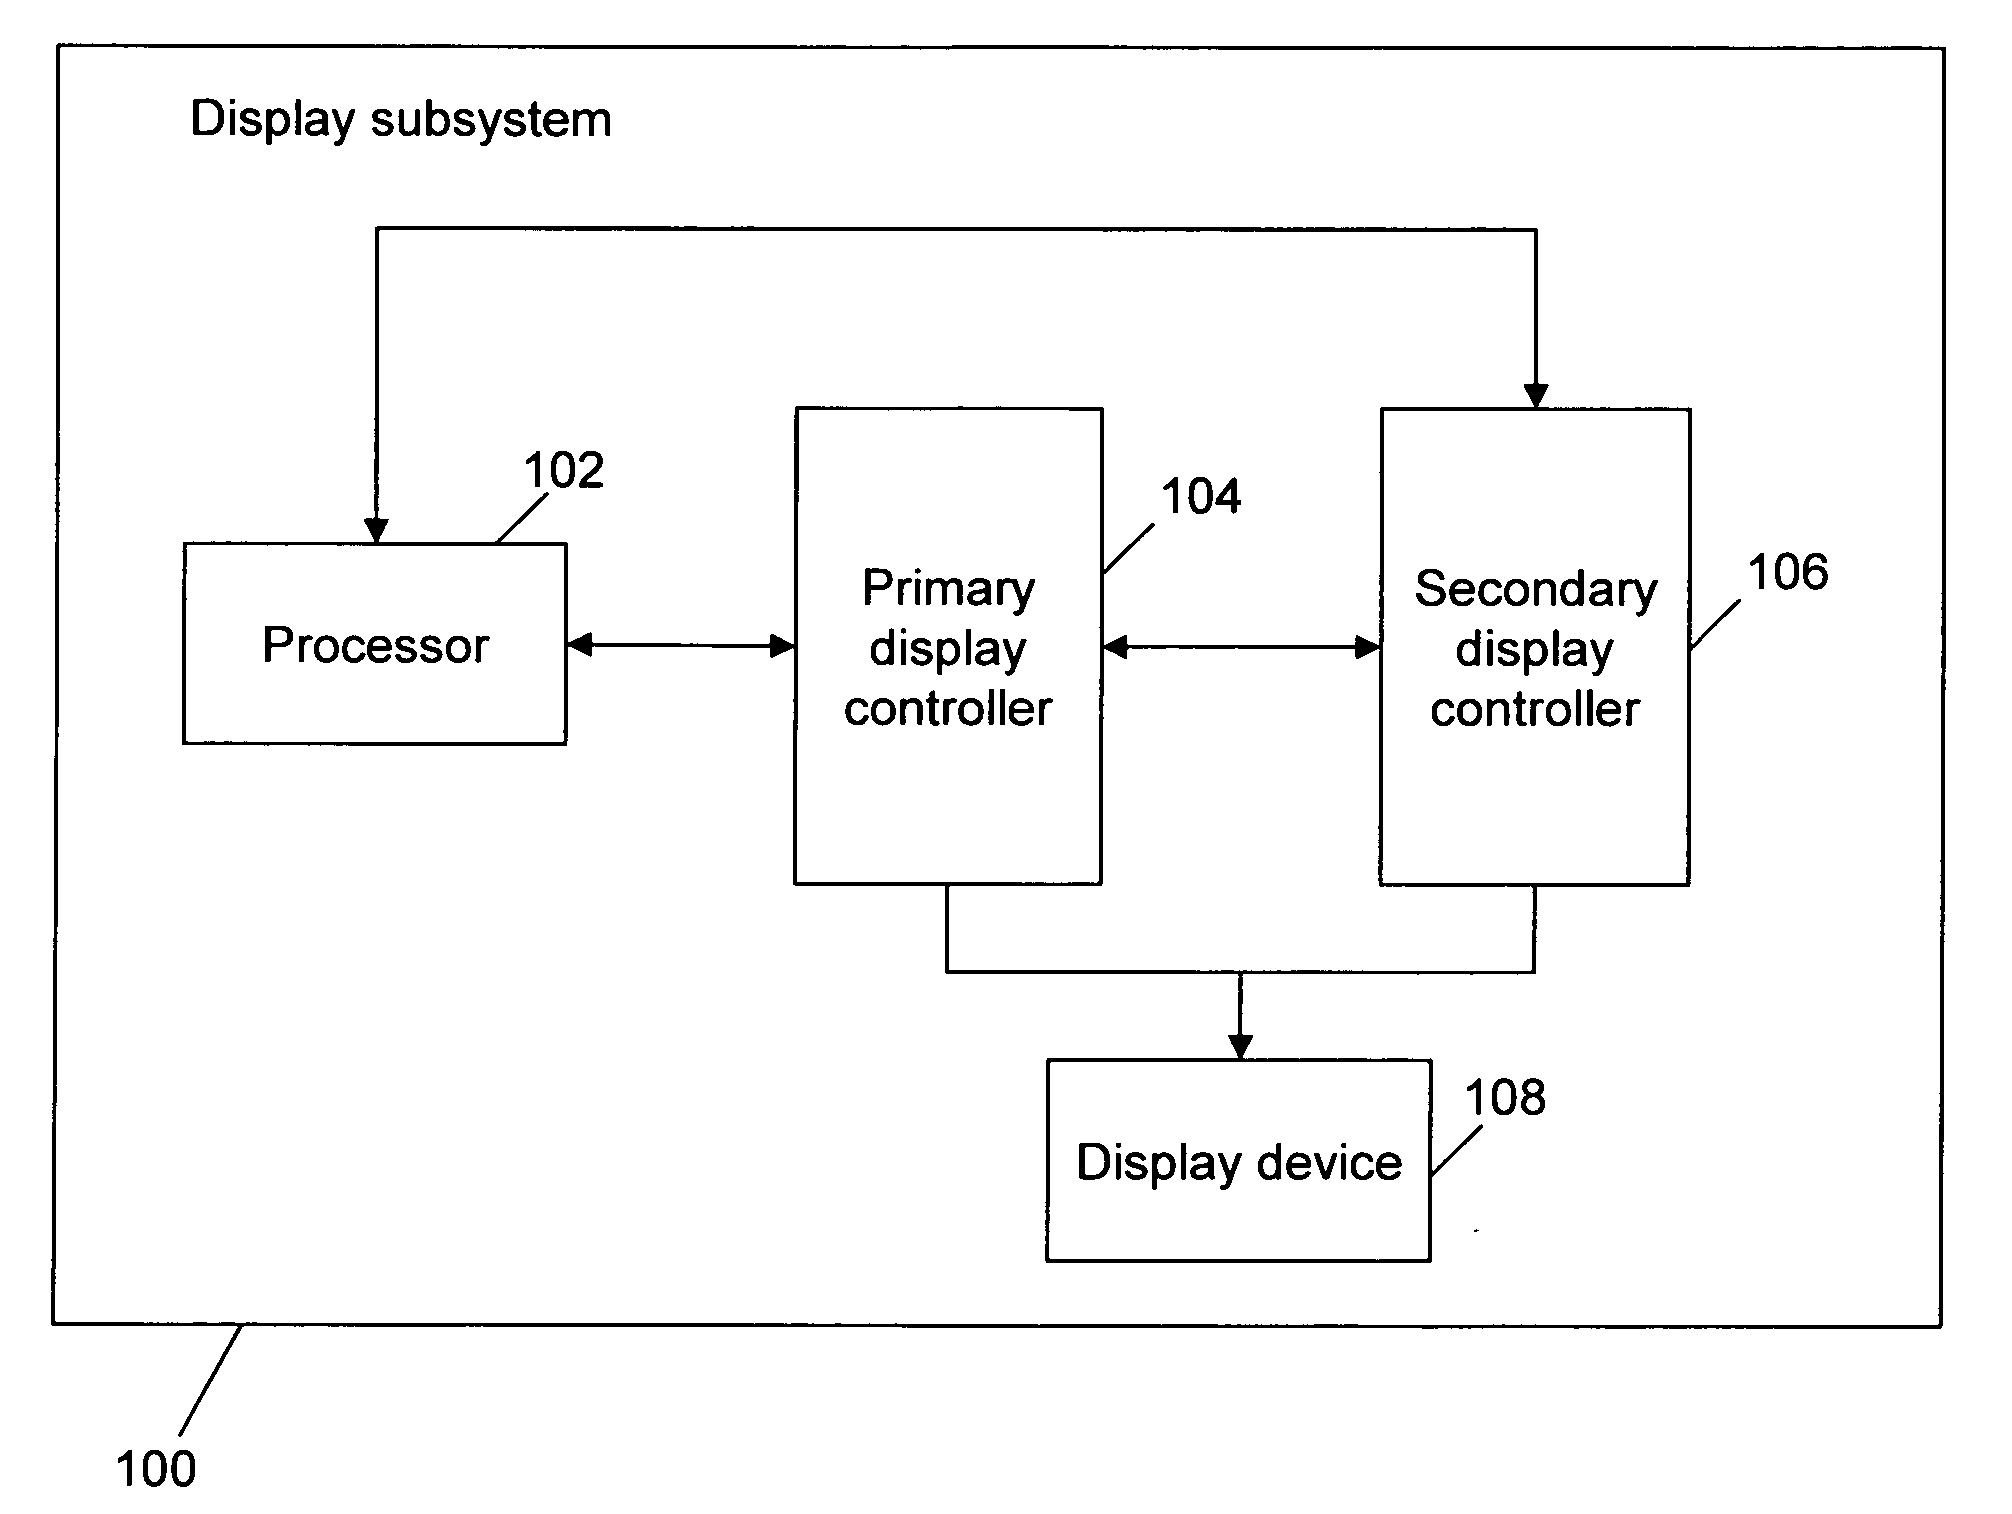 Self-refreshing display controller for a display device in a computational unit